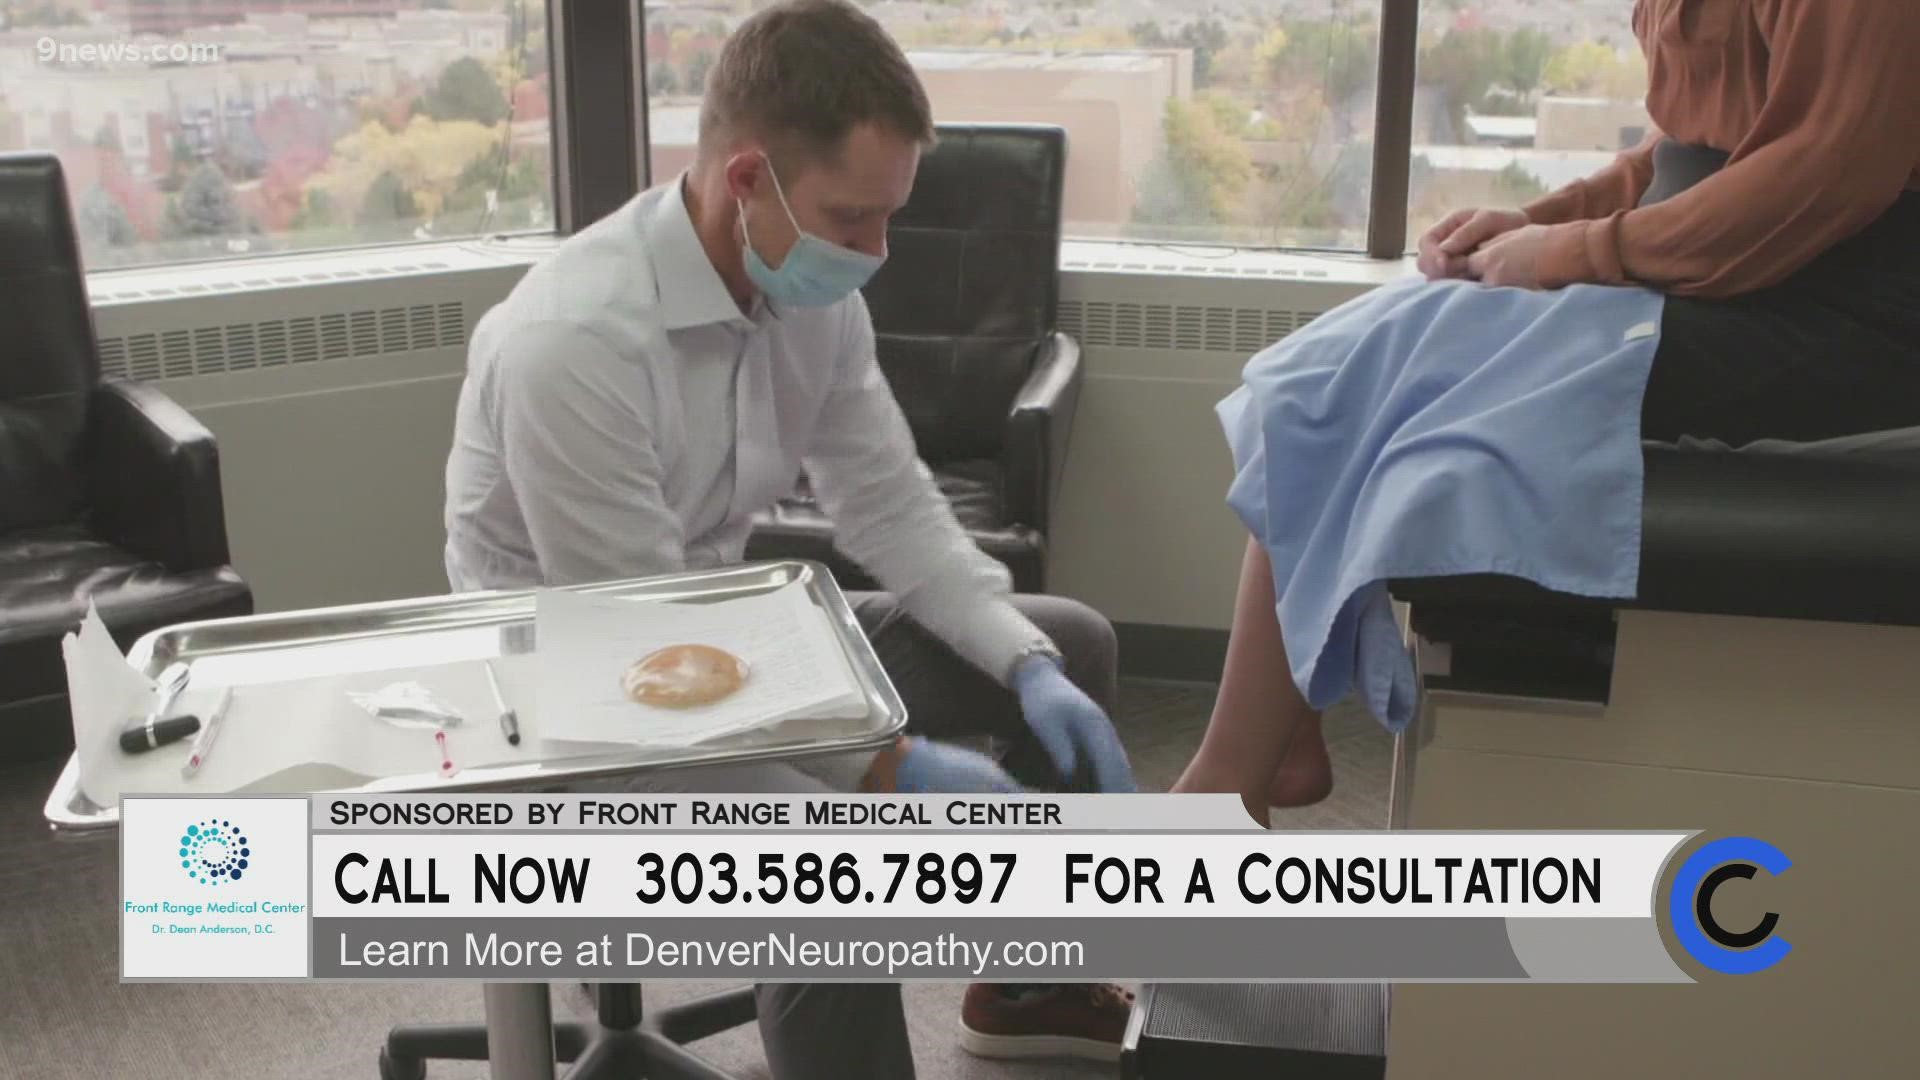 Schedule your $27 consultation at Front Range Medical Center today by calling 303.586.7897. Learn more at DenverNeuropathy.com. **PAID CONTENT**